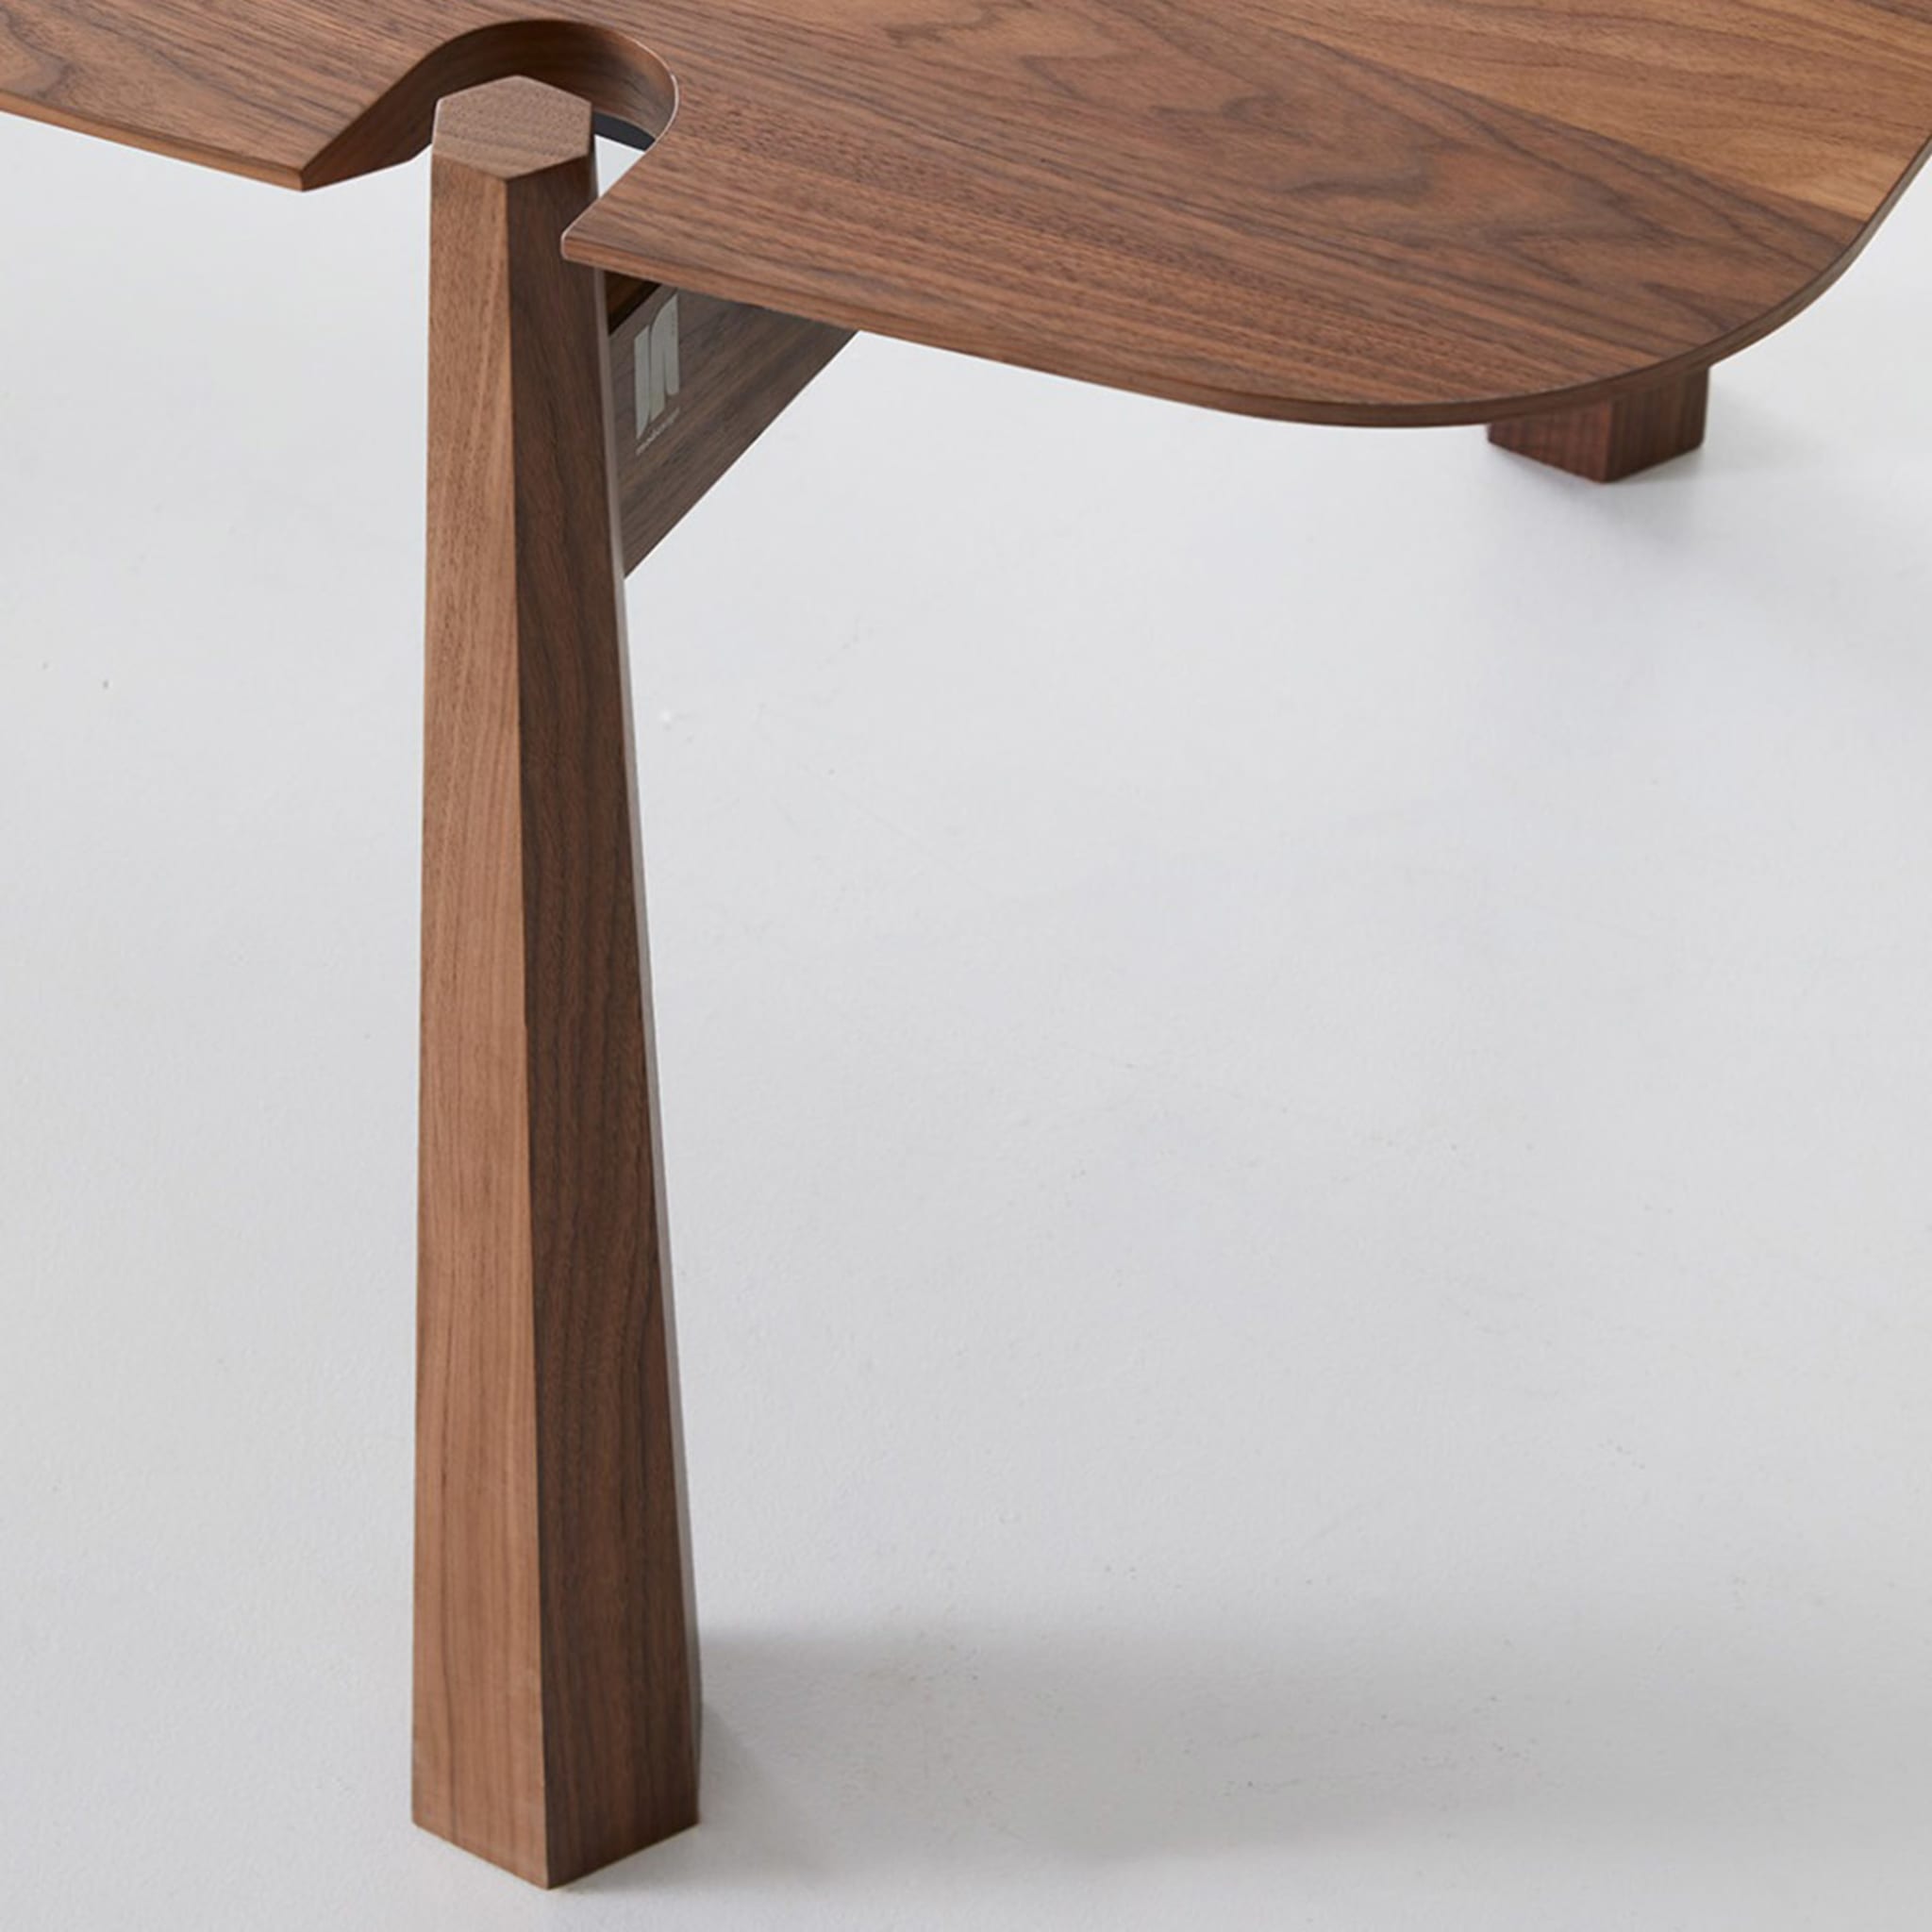 York Canaletto Wood Table - Alternative view 3